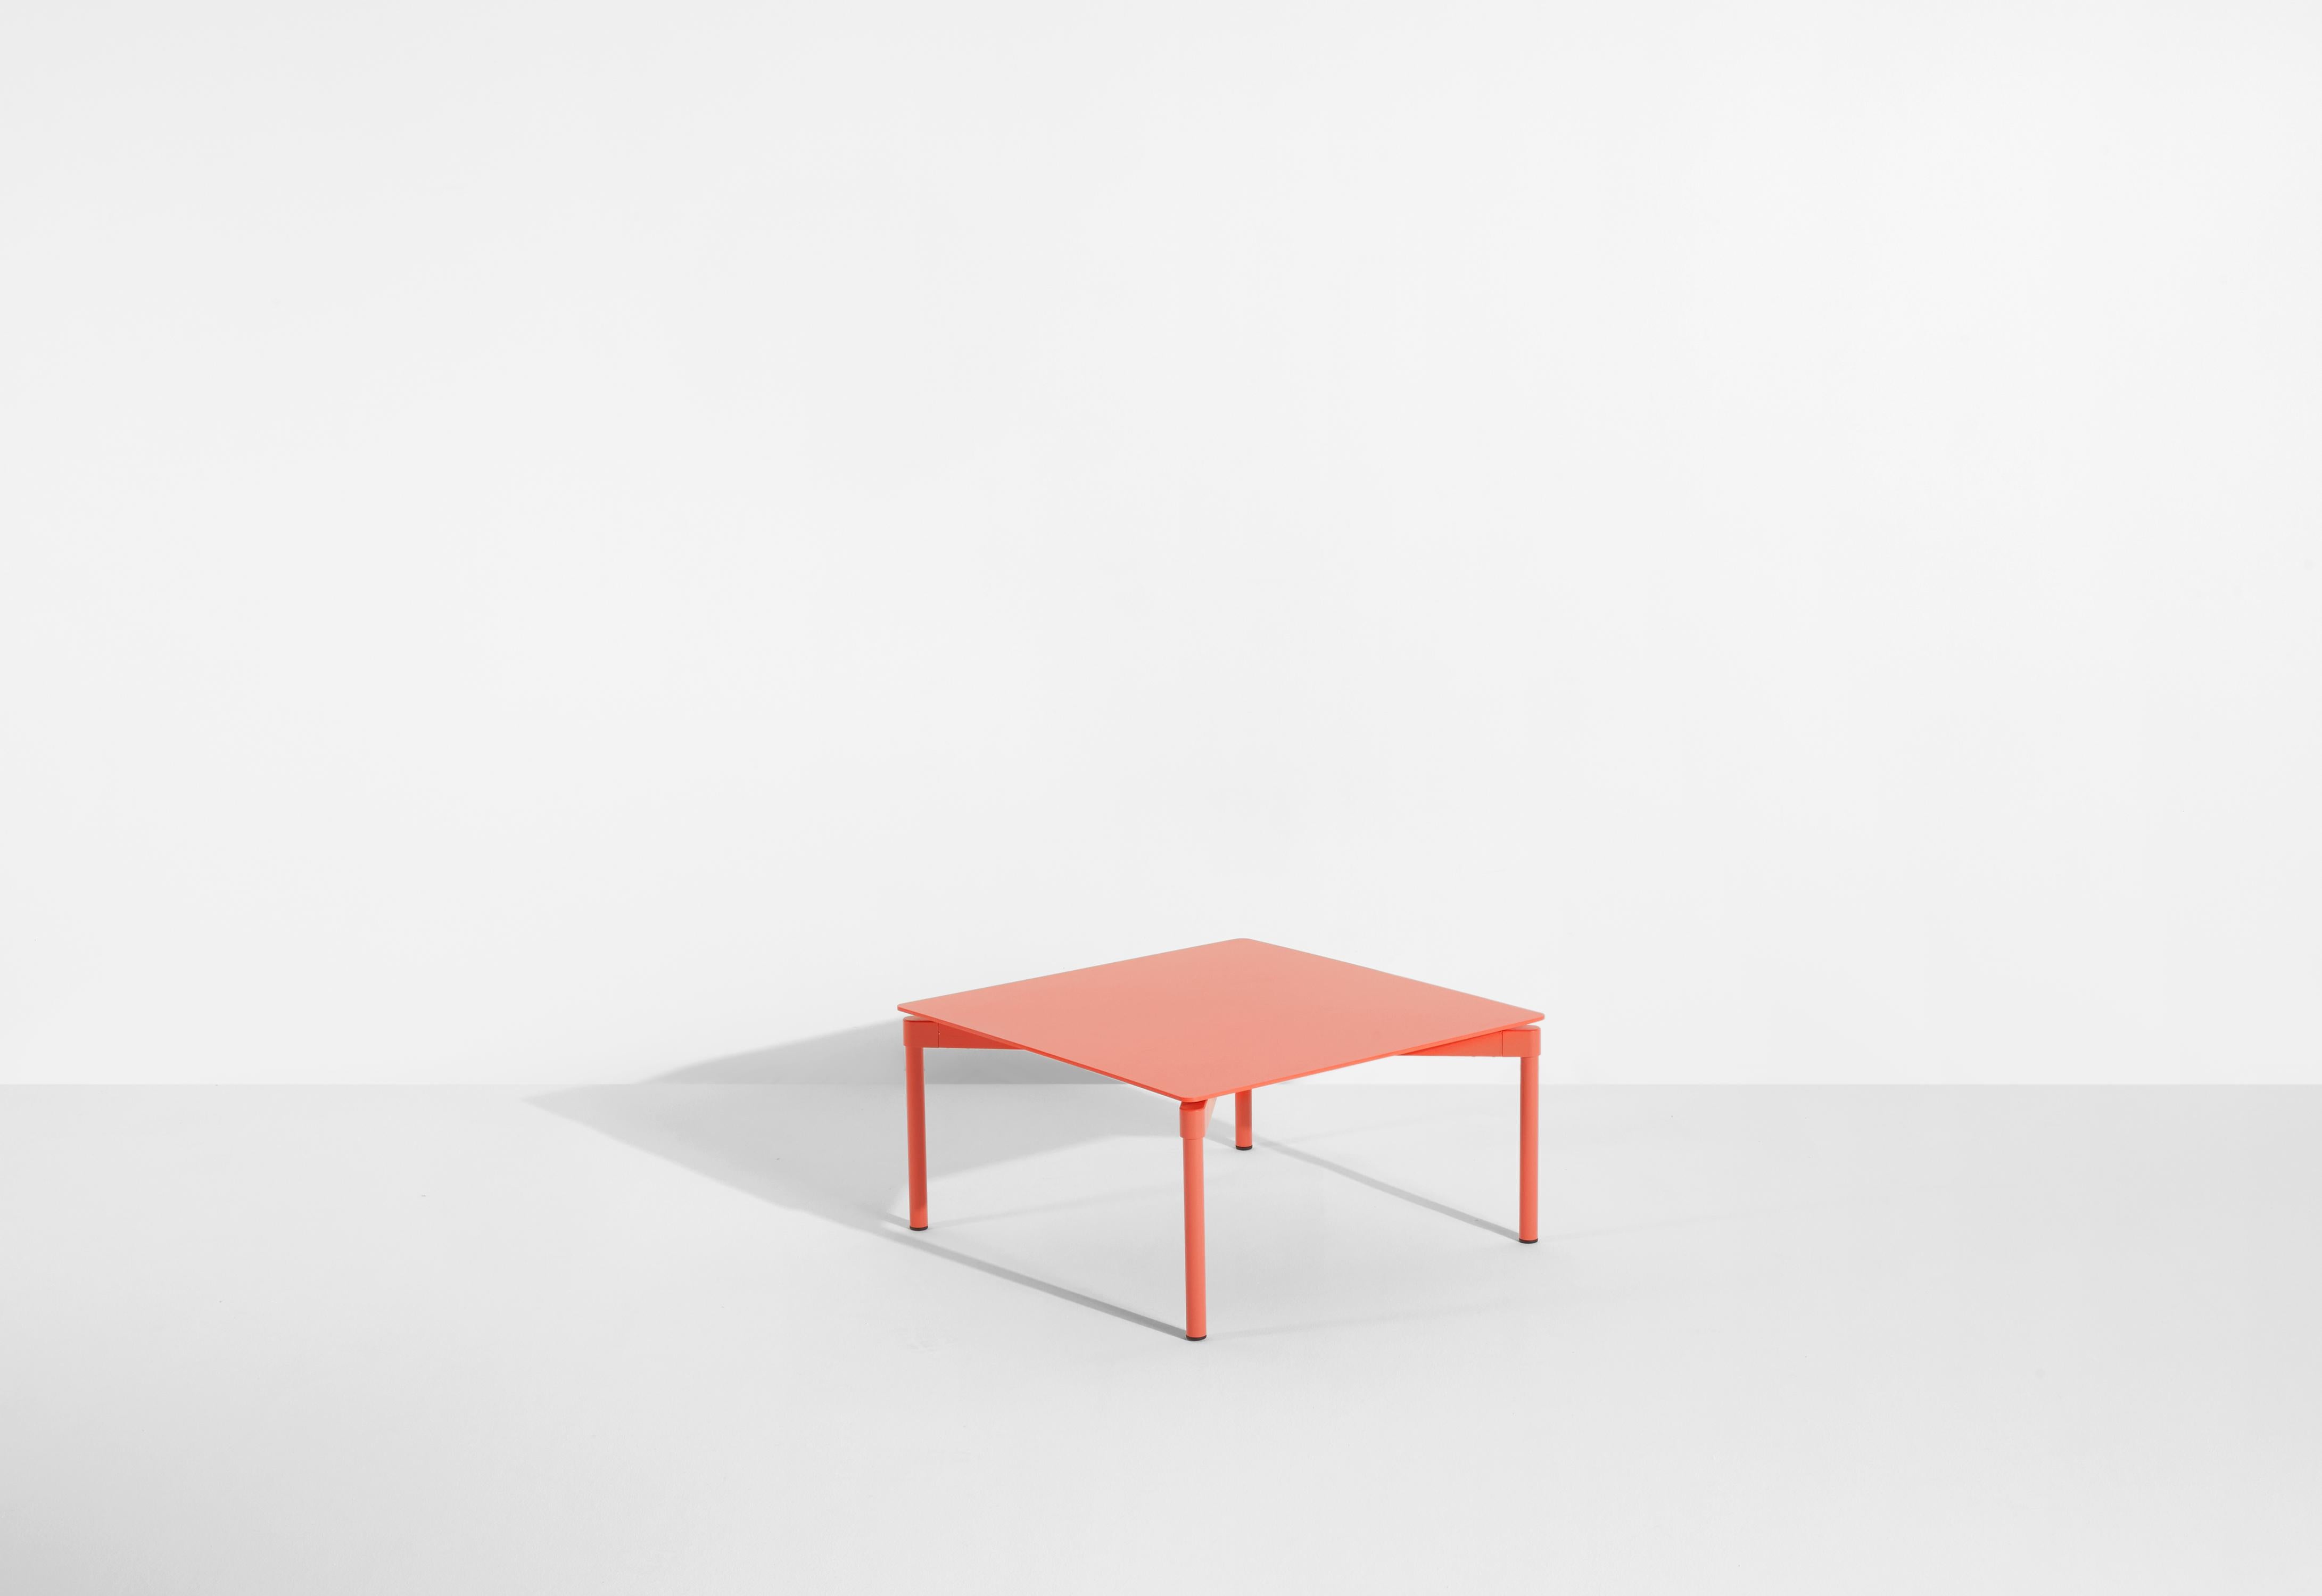 Chinese Petite Friture Fromme Coffee Table in Coral Aluminium by Tom Chung, 2020 For Sale